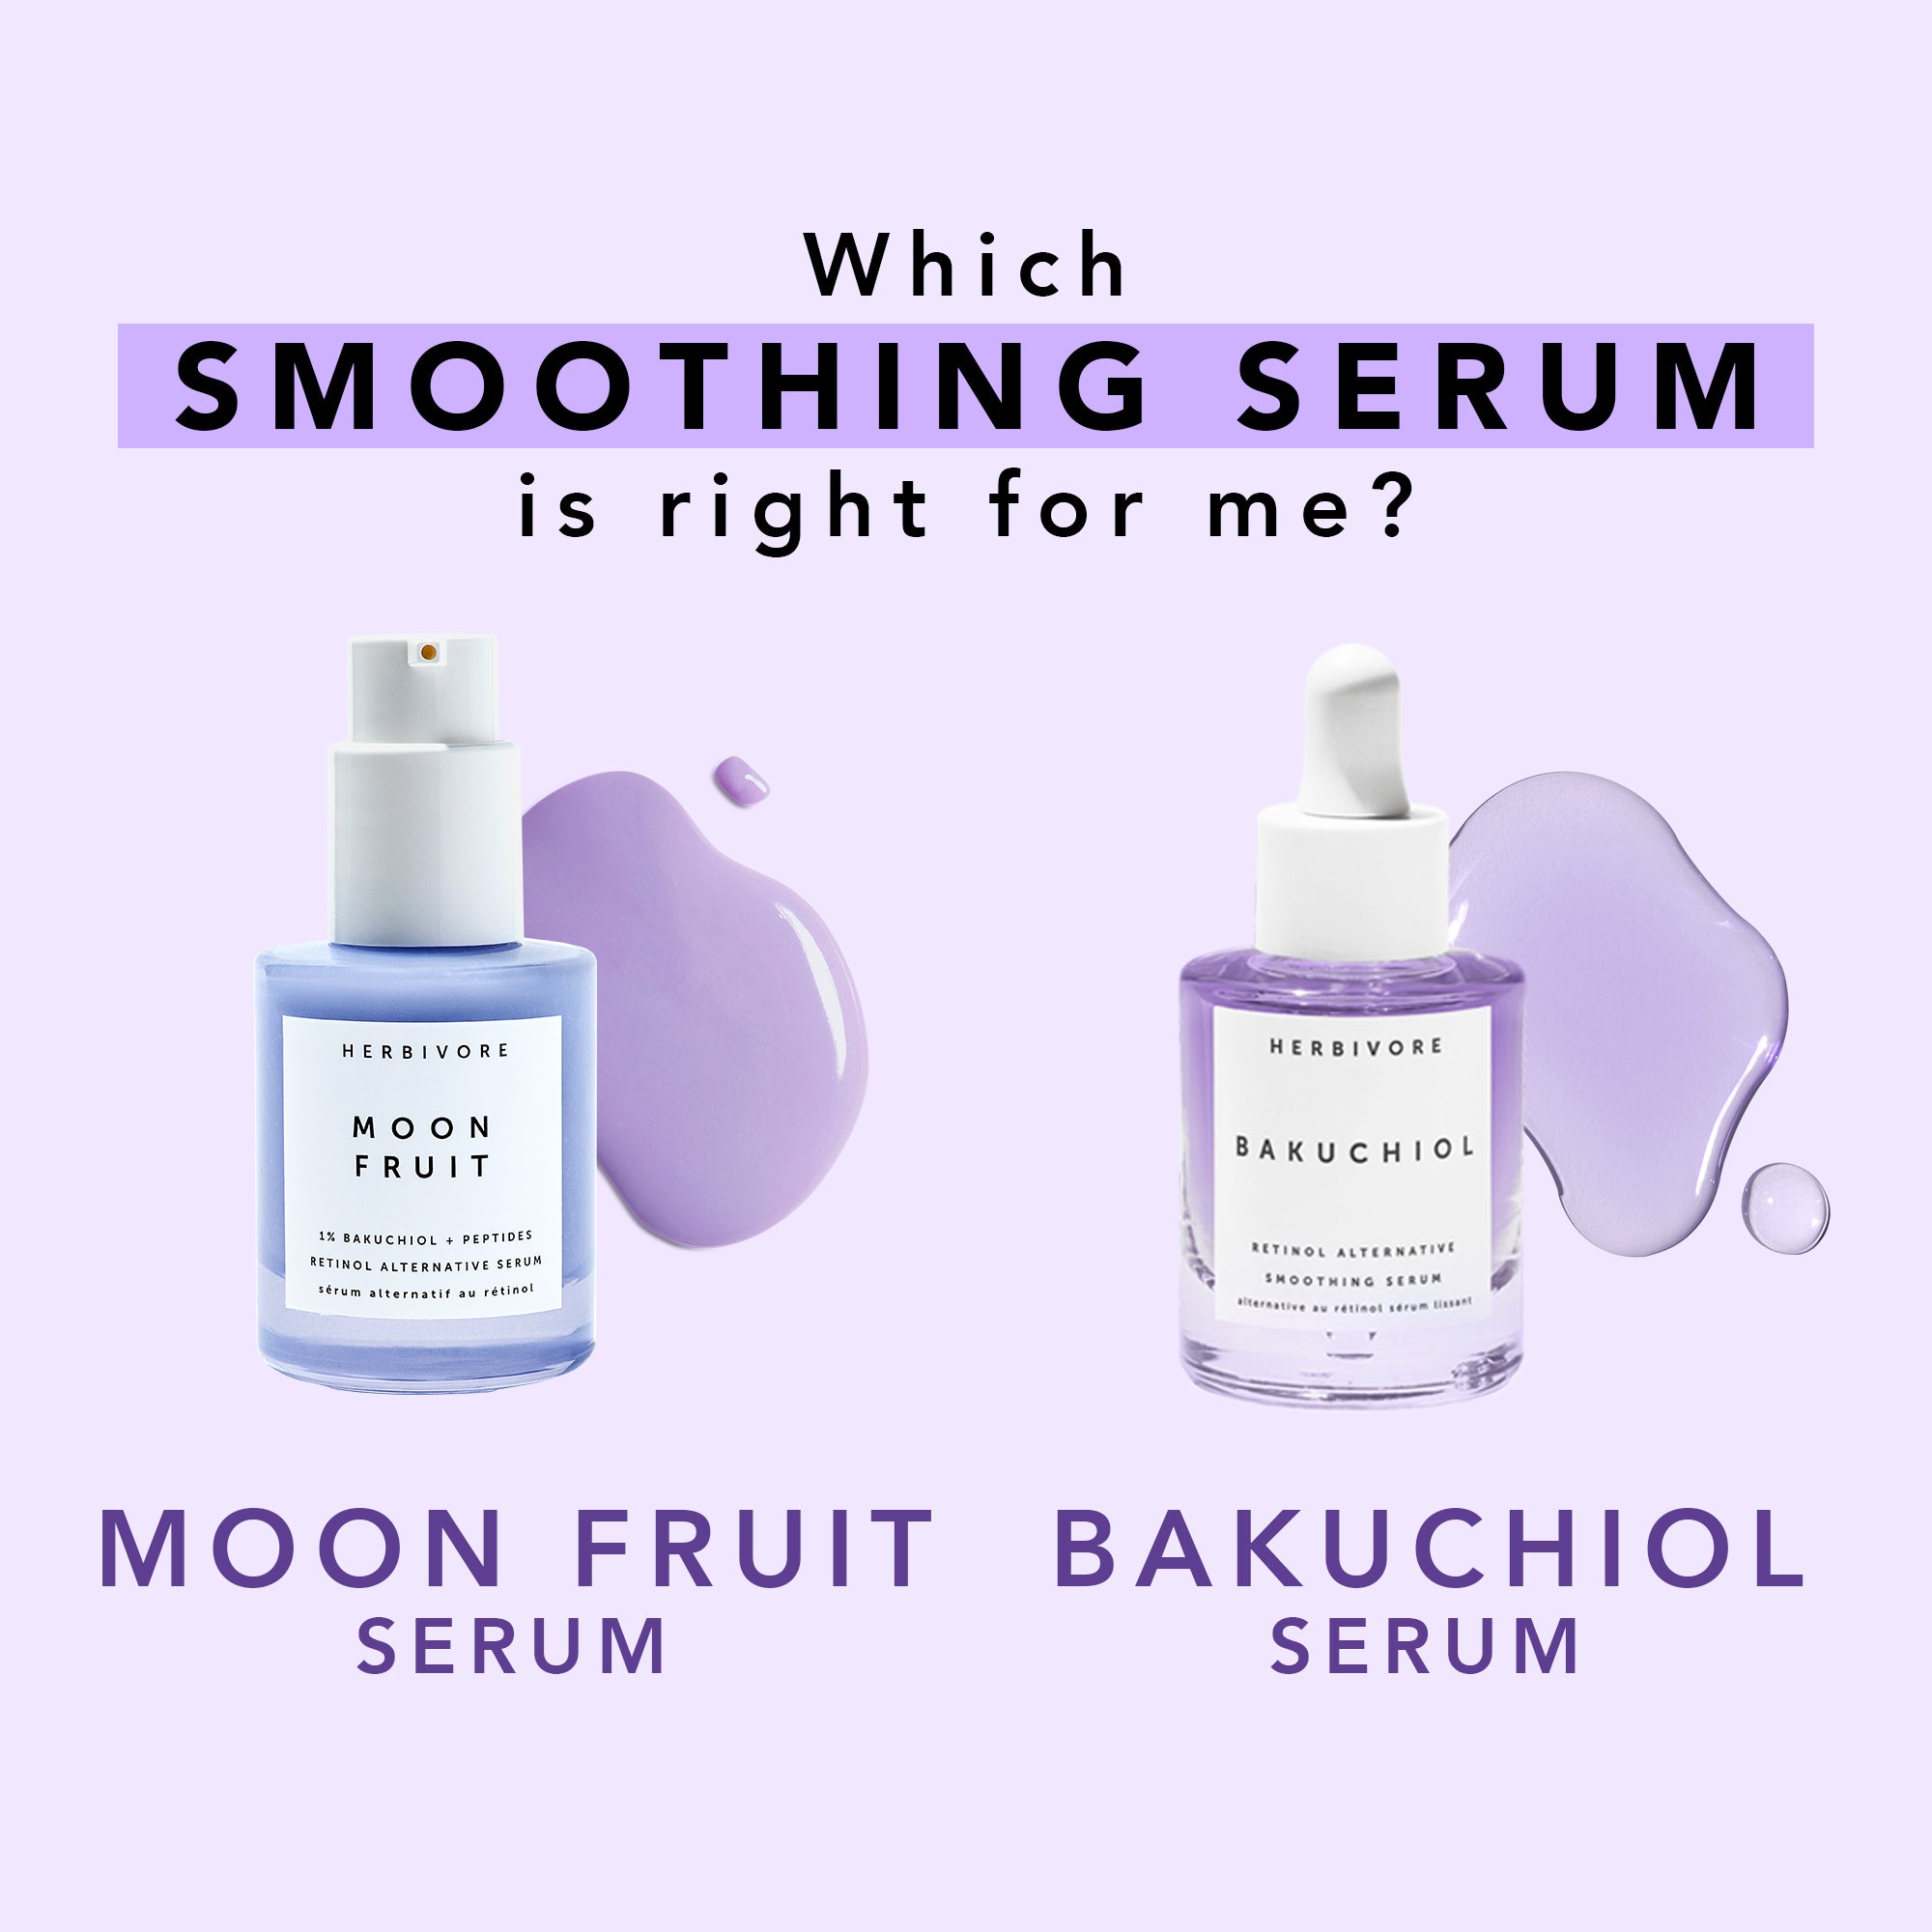 Which Smoothing Serum is right for me: Moon Fruit or Bakuchiol?